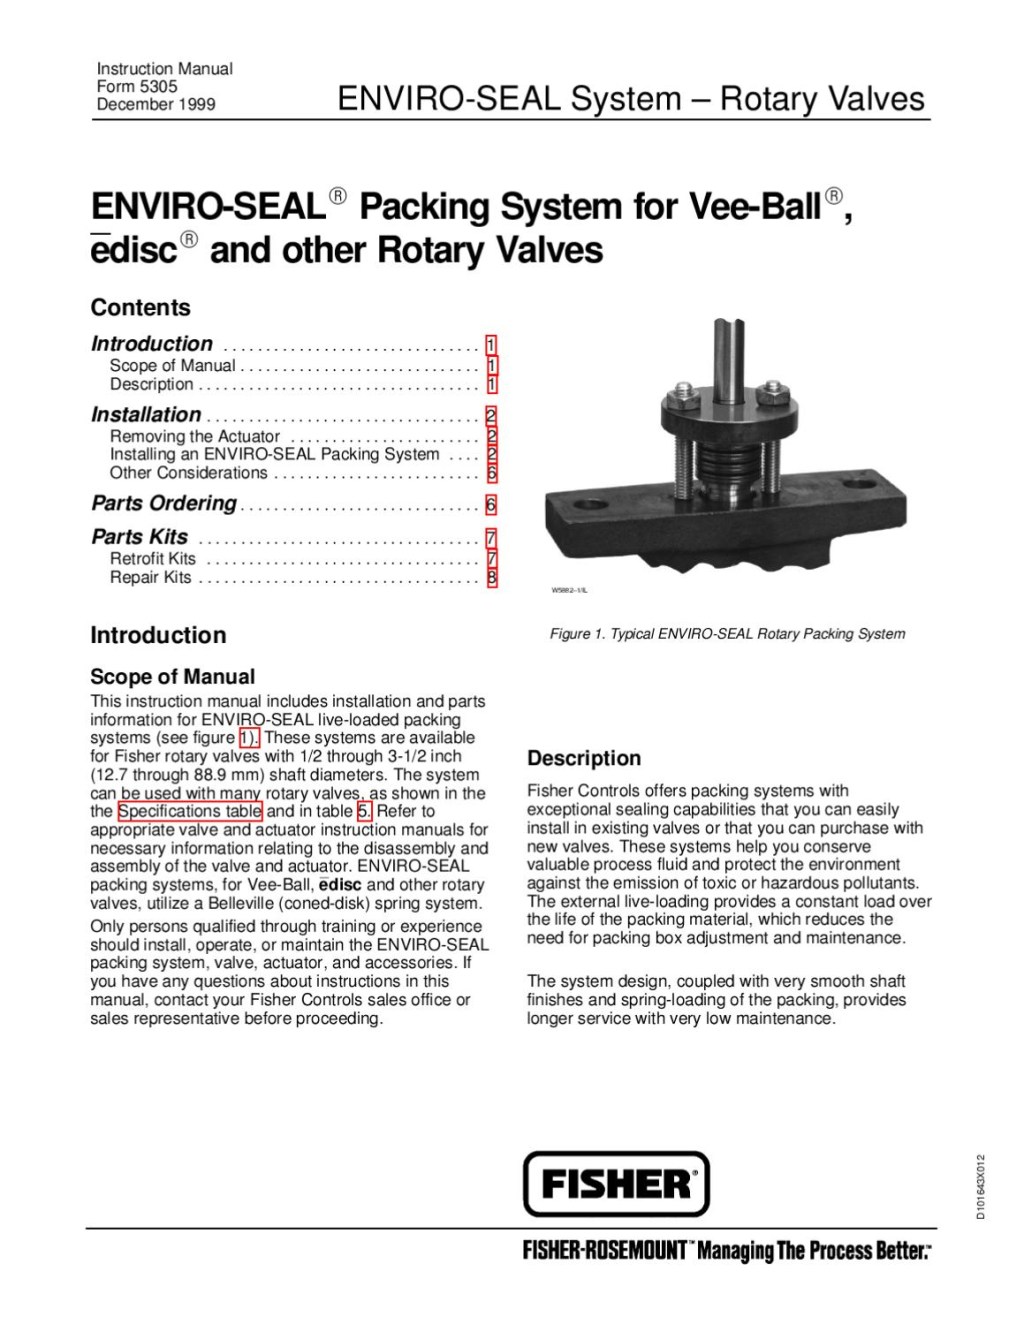 Picture of: ENVIROSEAL Packing Rotary Instruction Manual by RMC Process